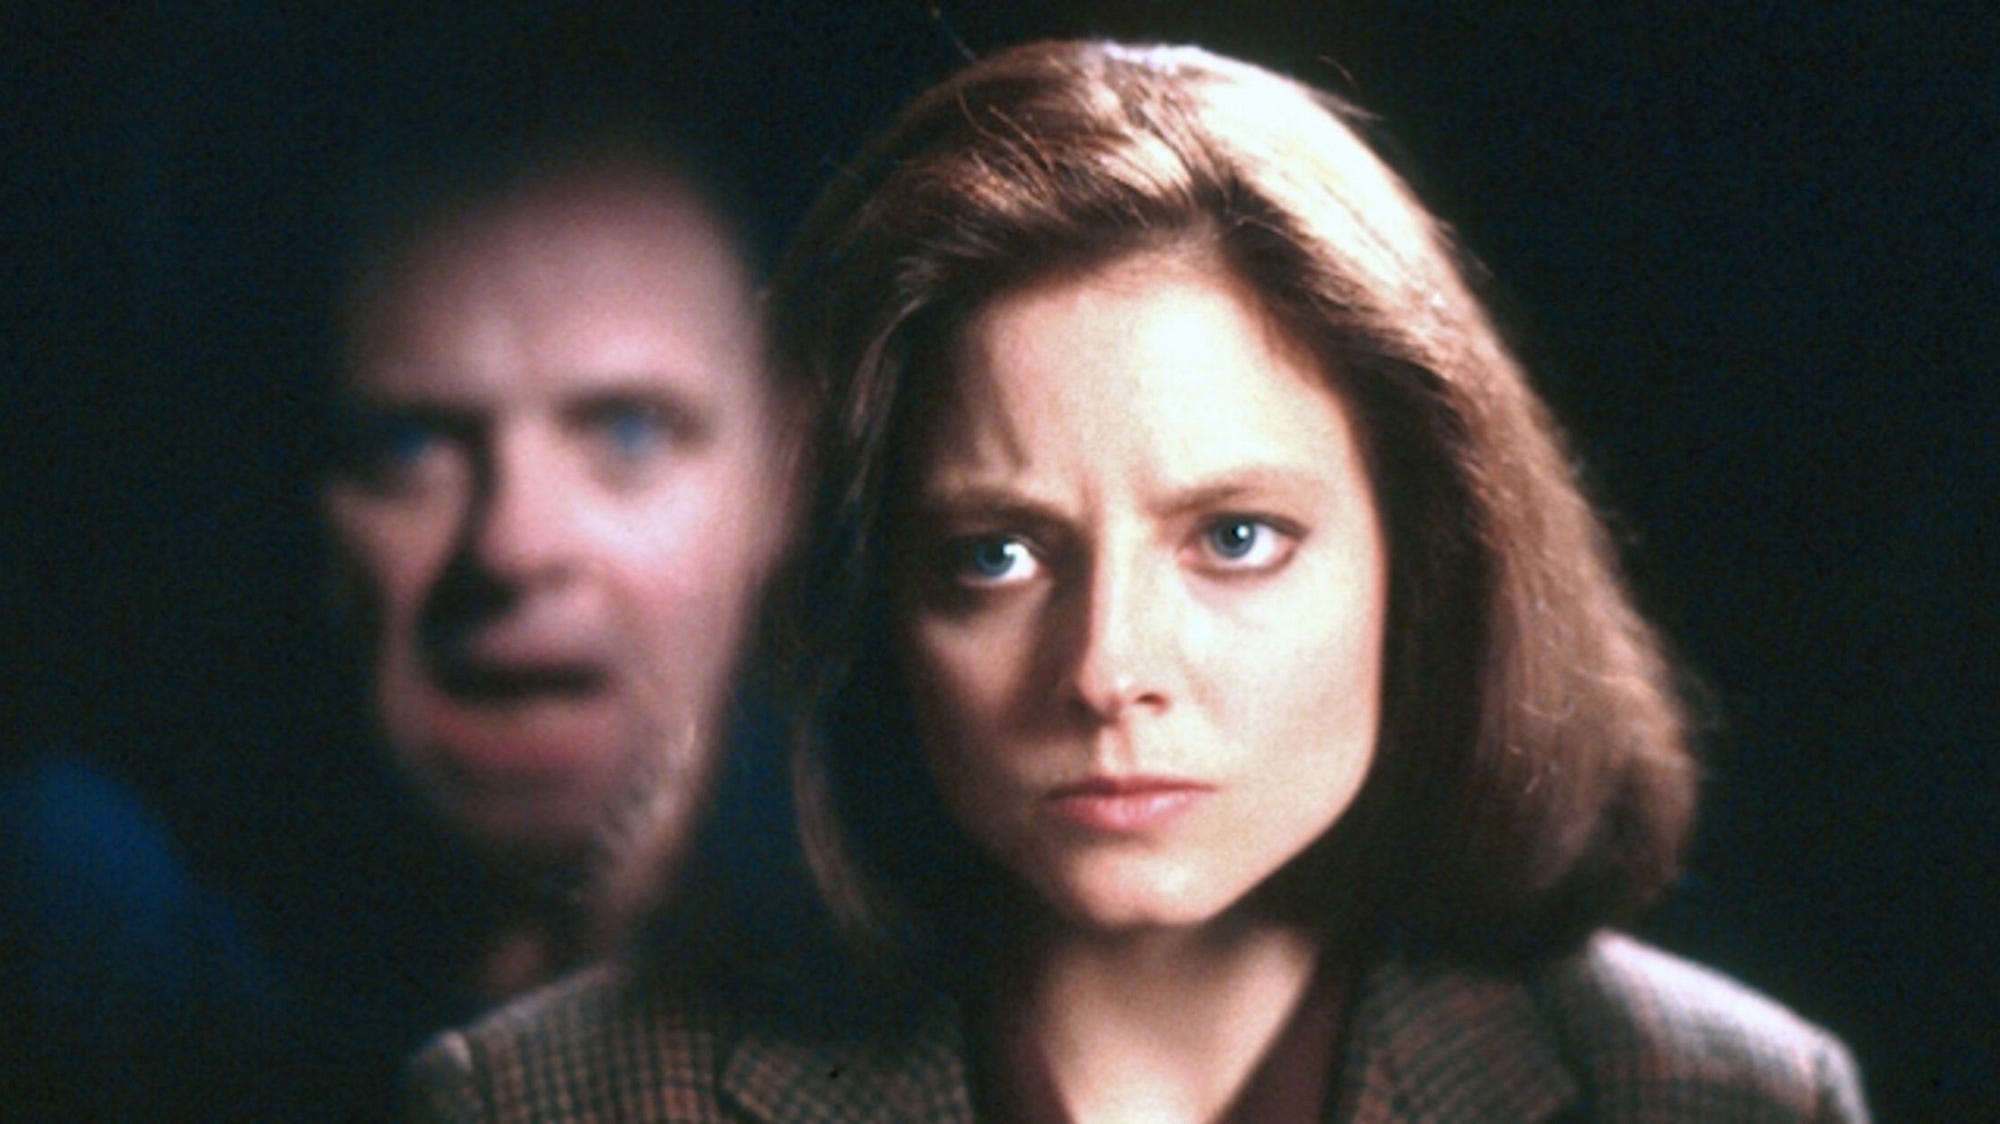 Silence Of Lambs' Is About That Scare Men | by John DeVore | Humungus | Medium